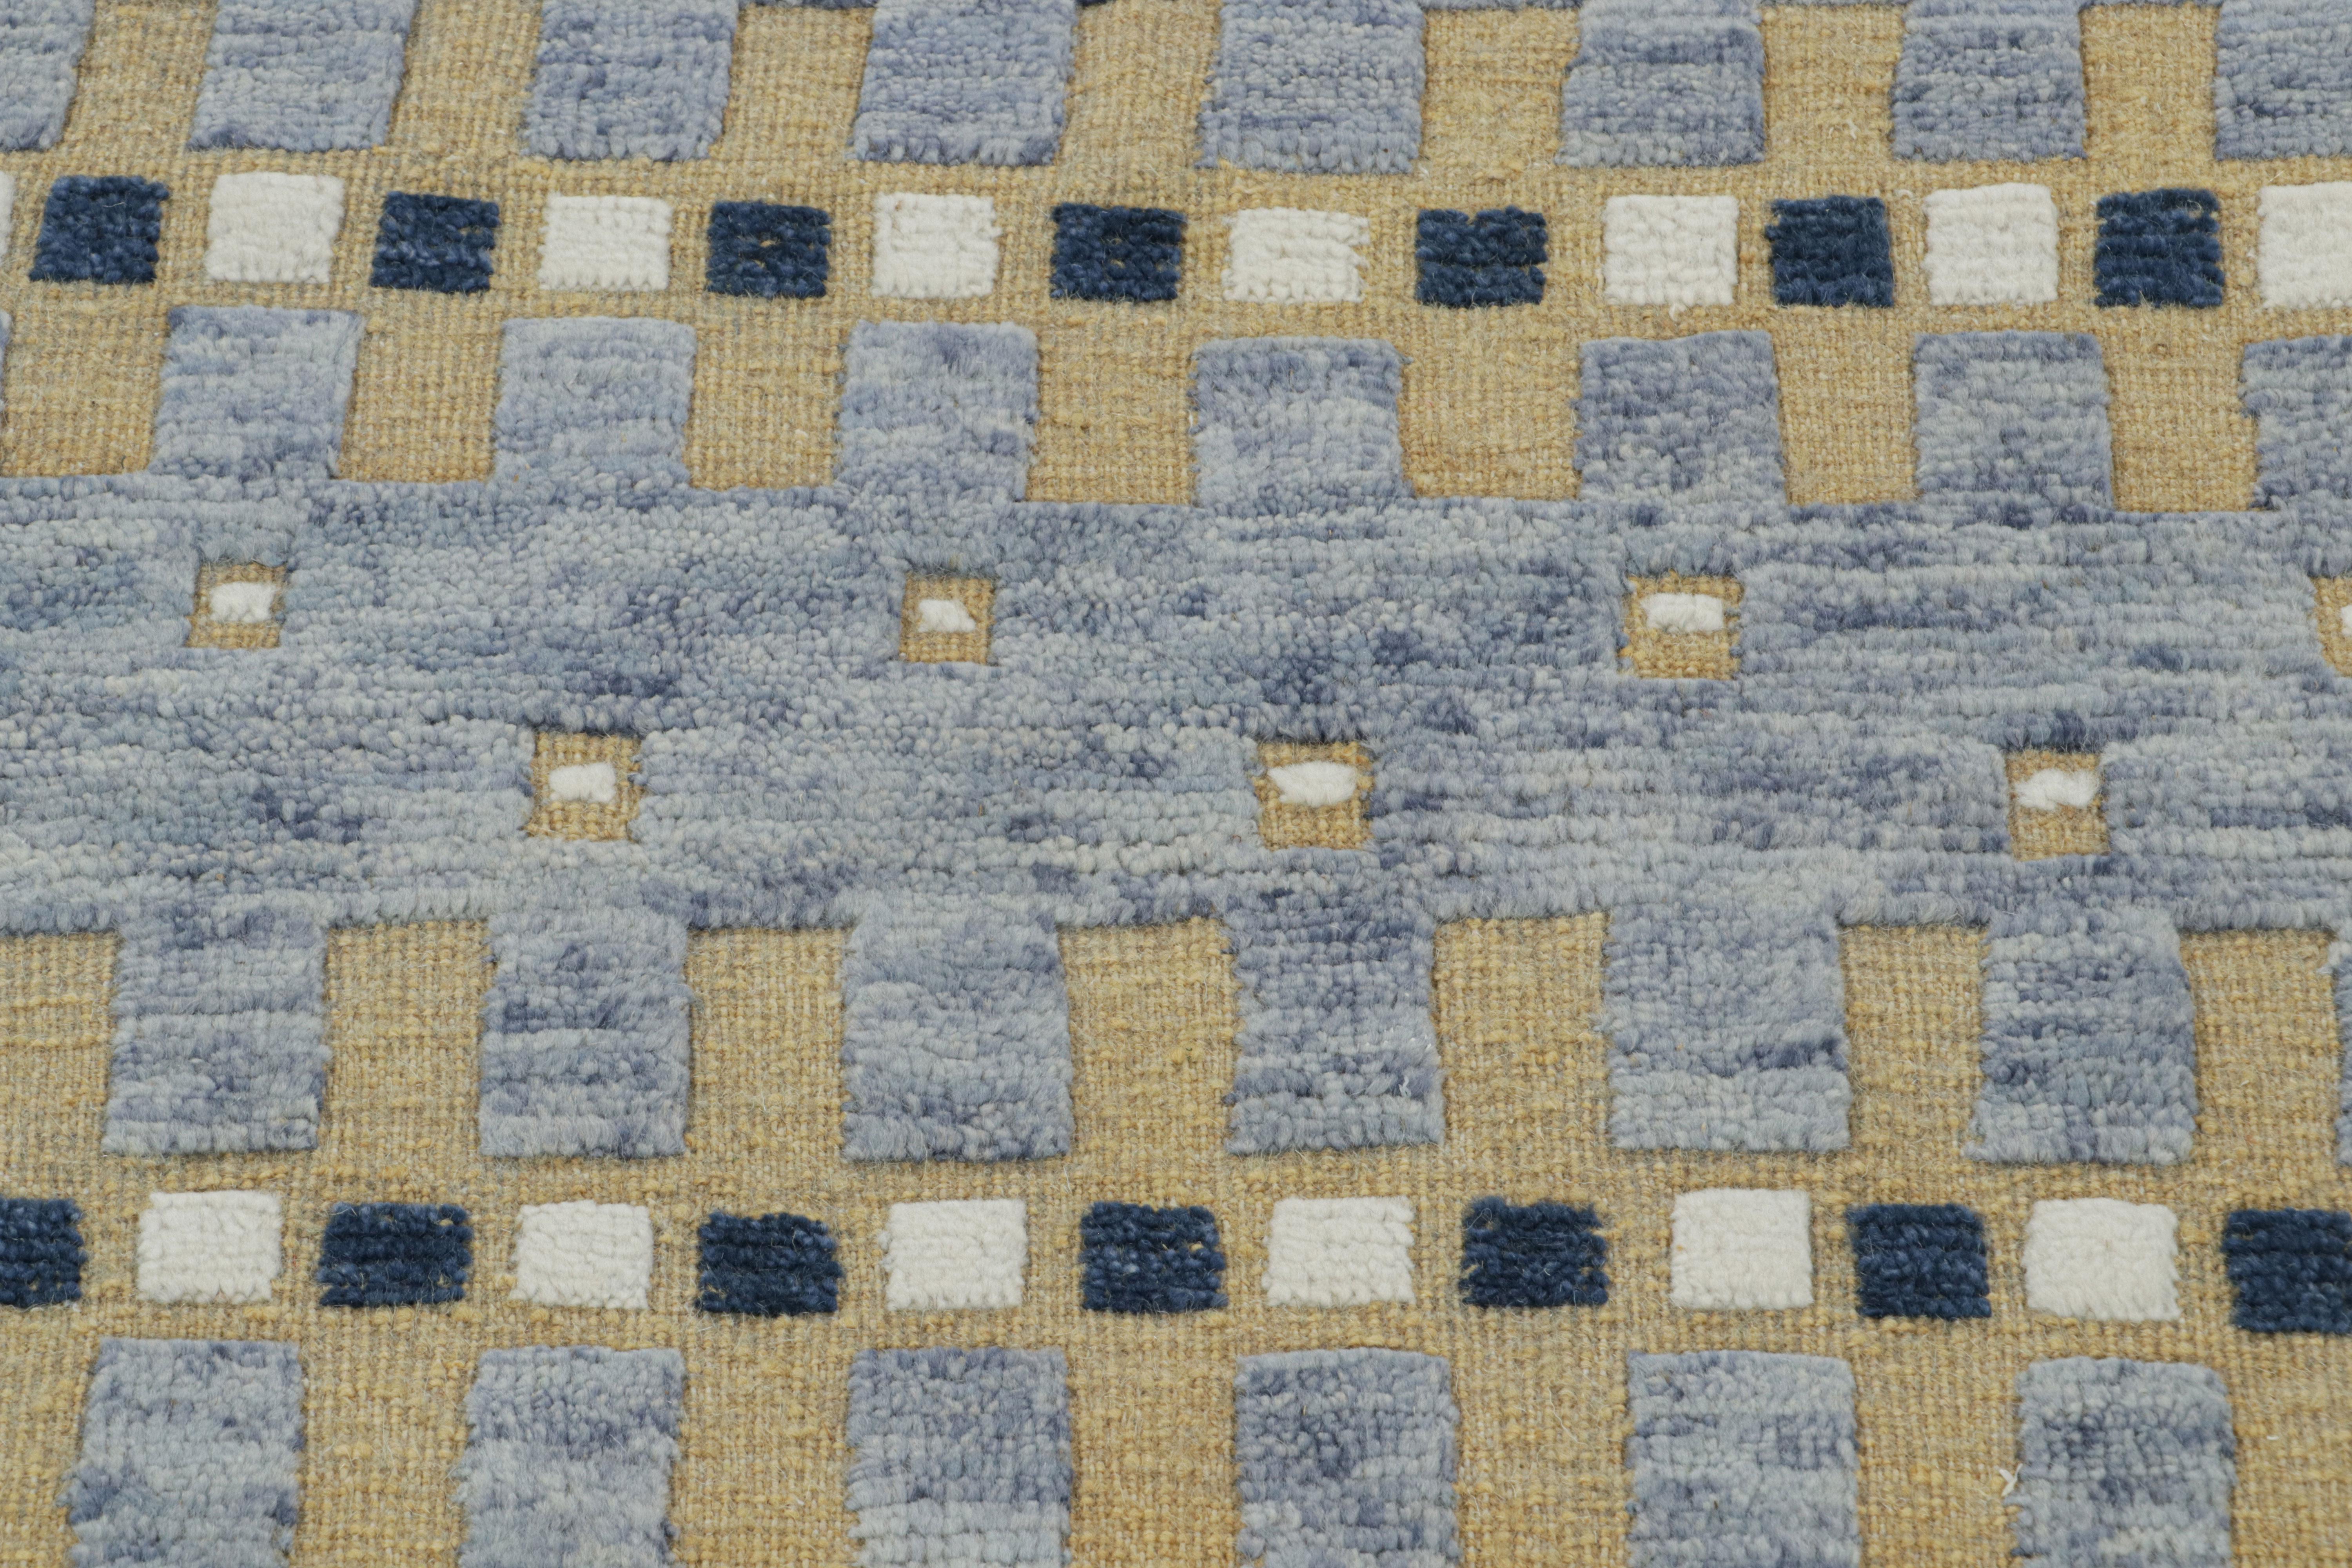 Hand-Knotted Rug & Kilim’s Scandinavian Style Rug in Blue, Beige-Brown Geometric Patterns For Sale